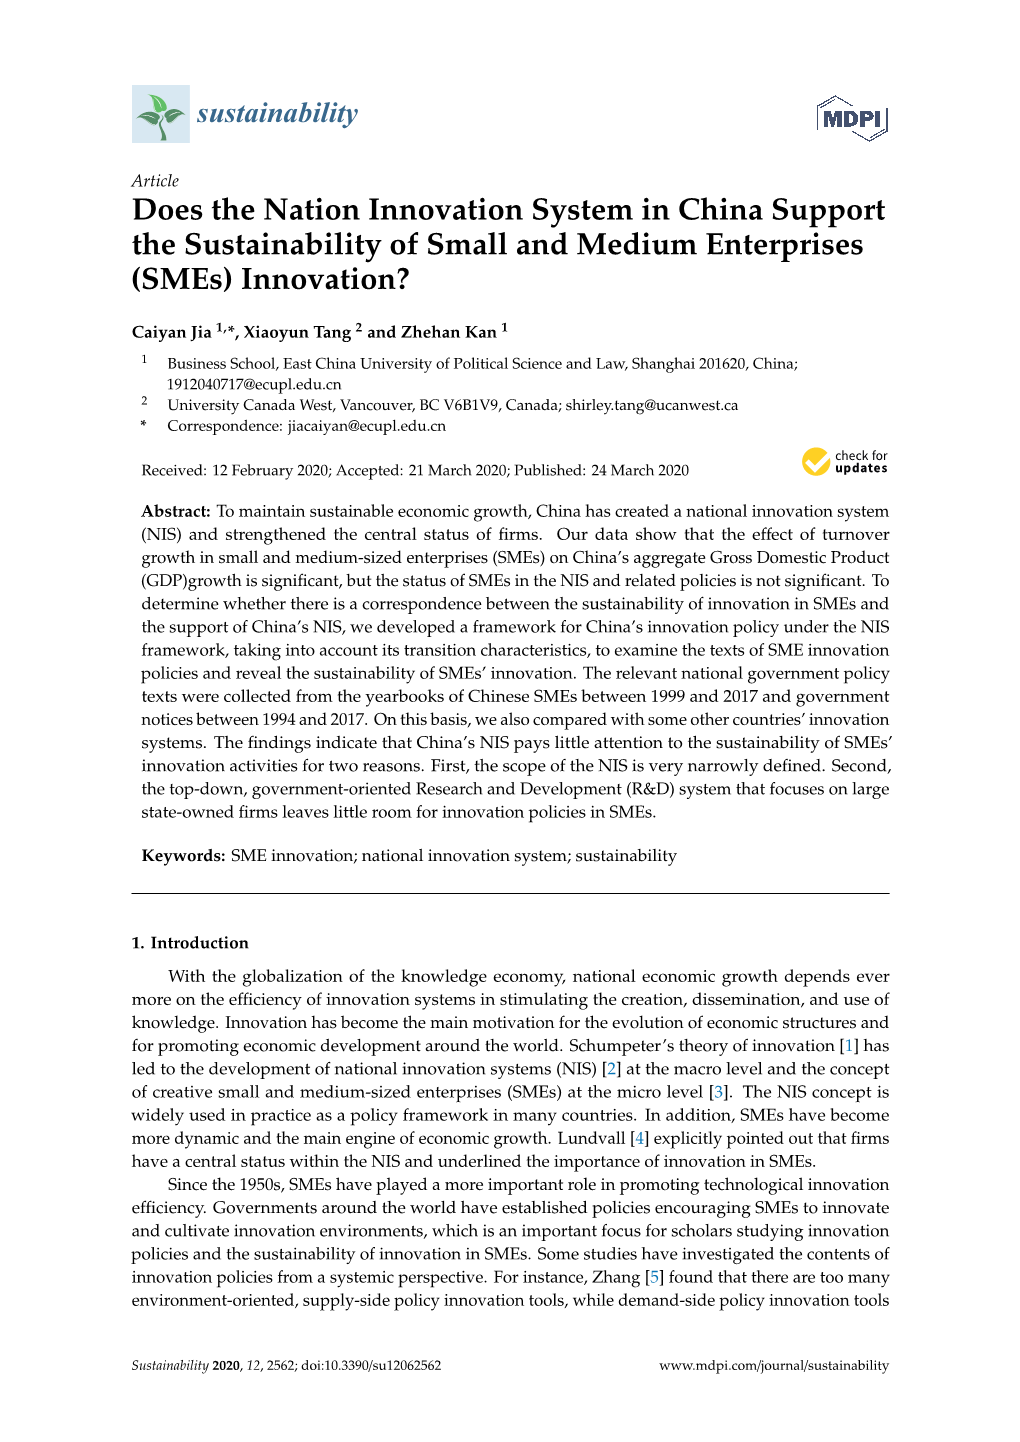 Does the Nation Innovation System in China Support the Sustainability of Small and Medium Enterprises (Smes) Innovation?